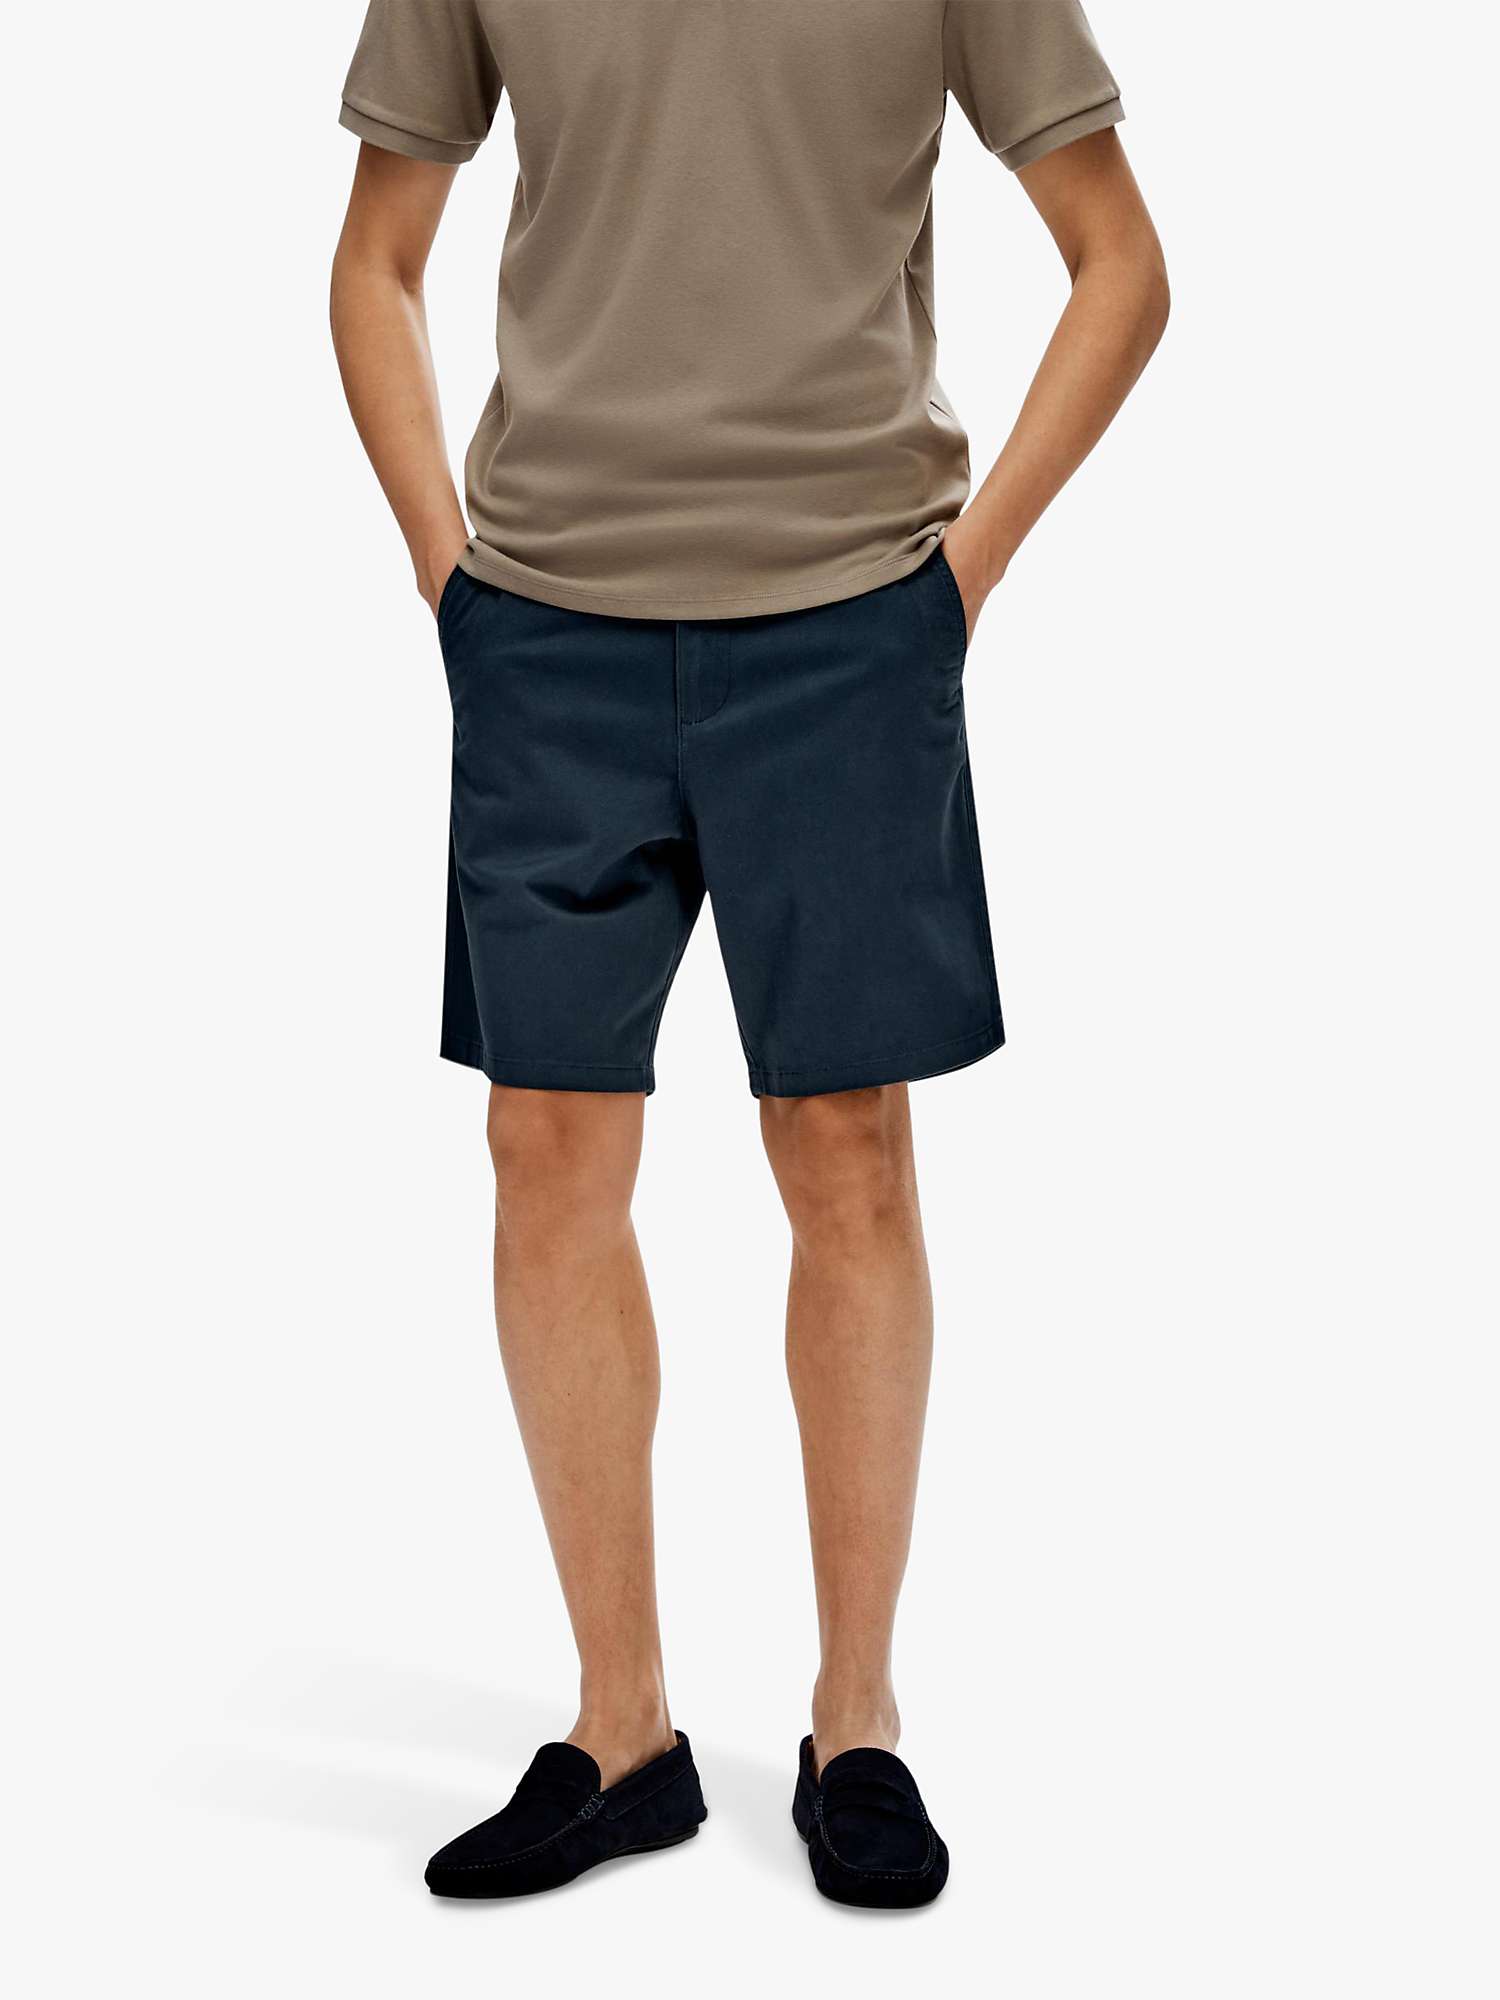 Buy SELECTED HOMME Bill Chino Shorts, Dark Sapphire Online at johnlewis.com